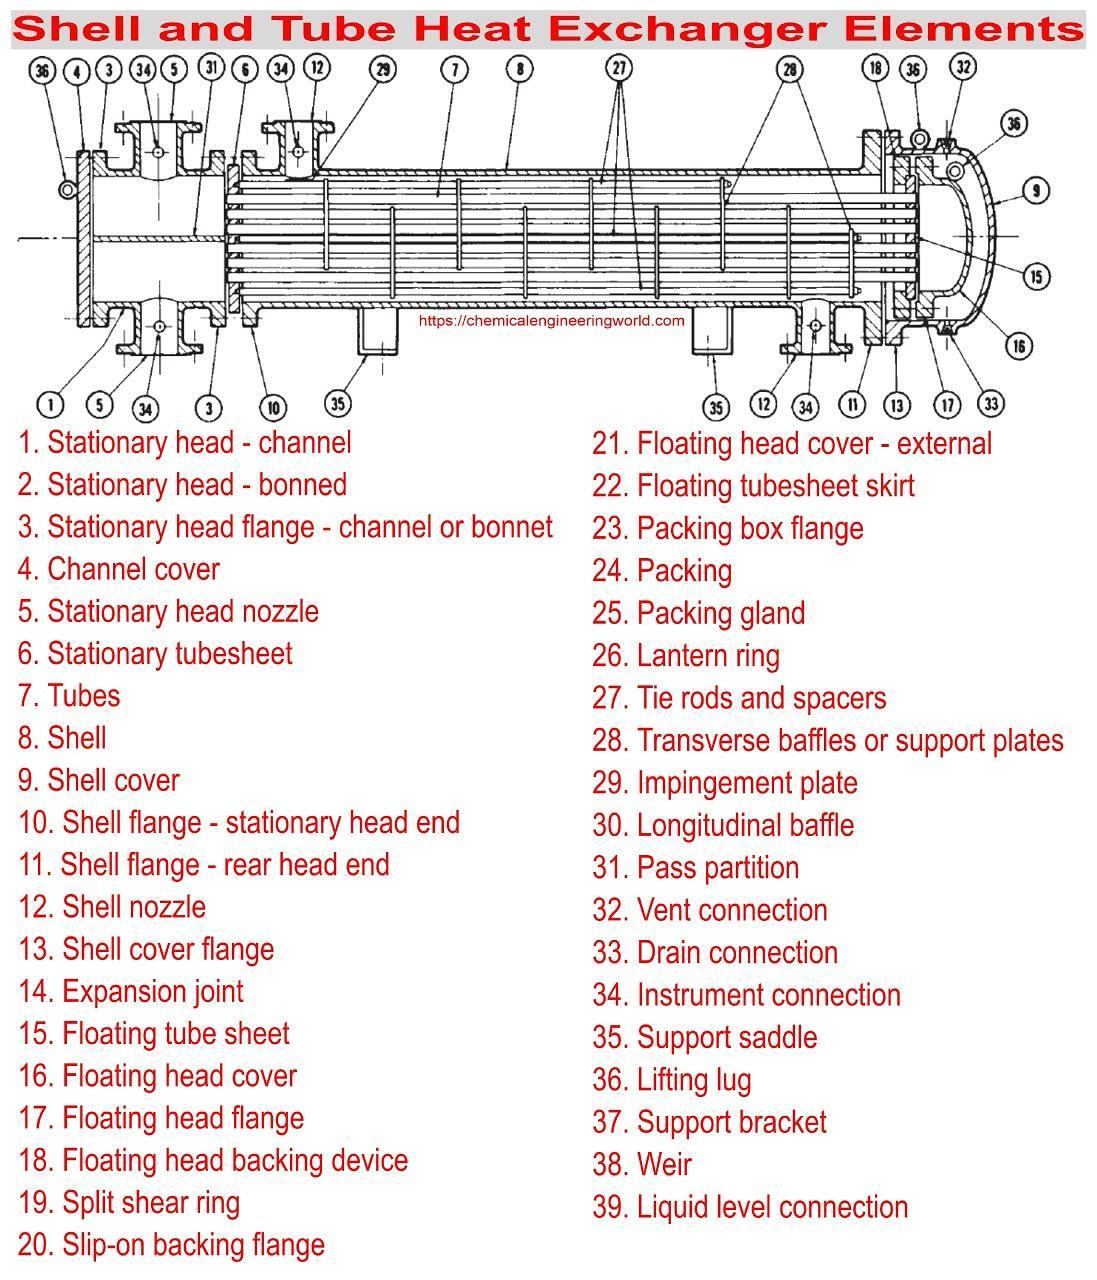 Shell and Tube Heat Exchanger Elements Nomenclature